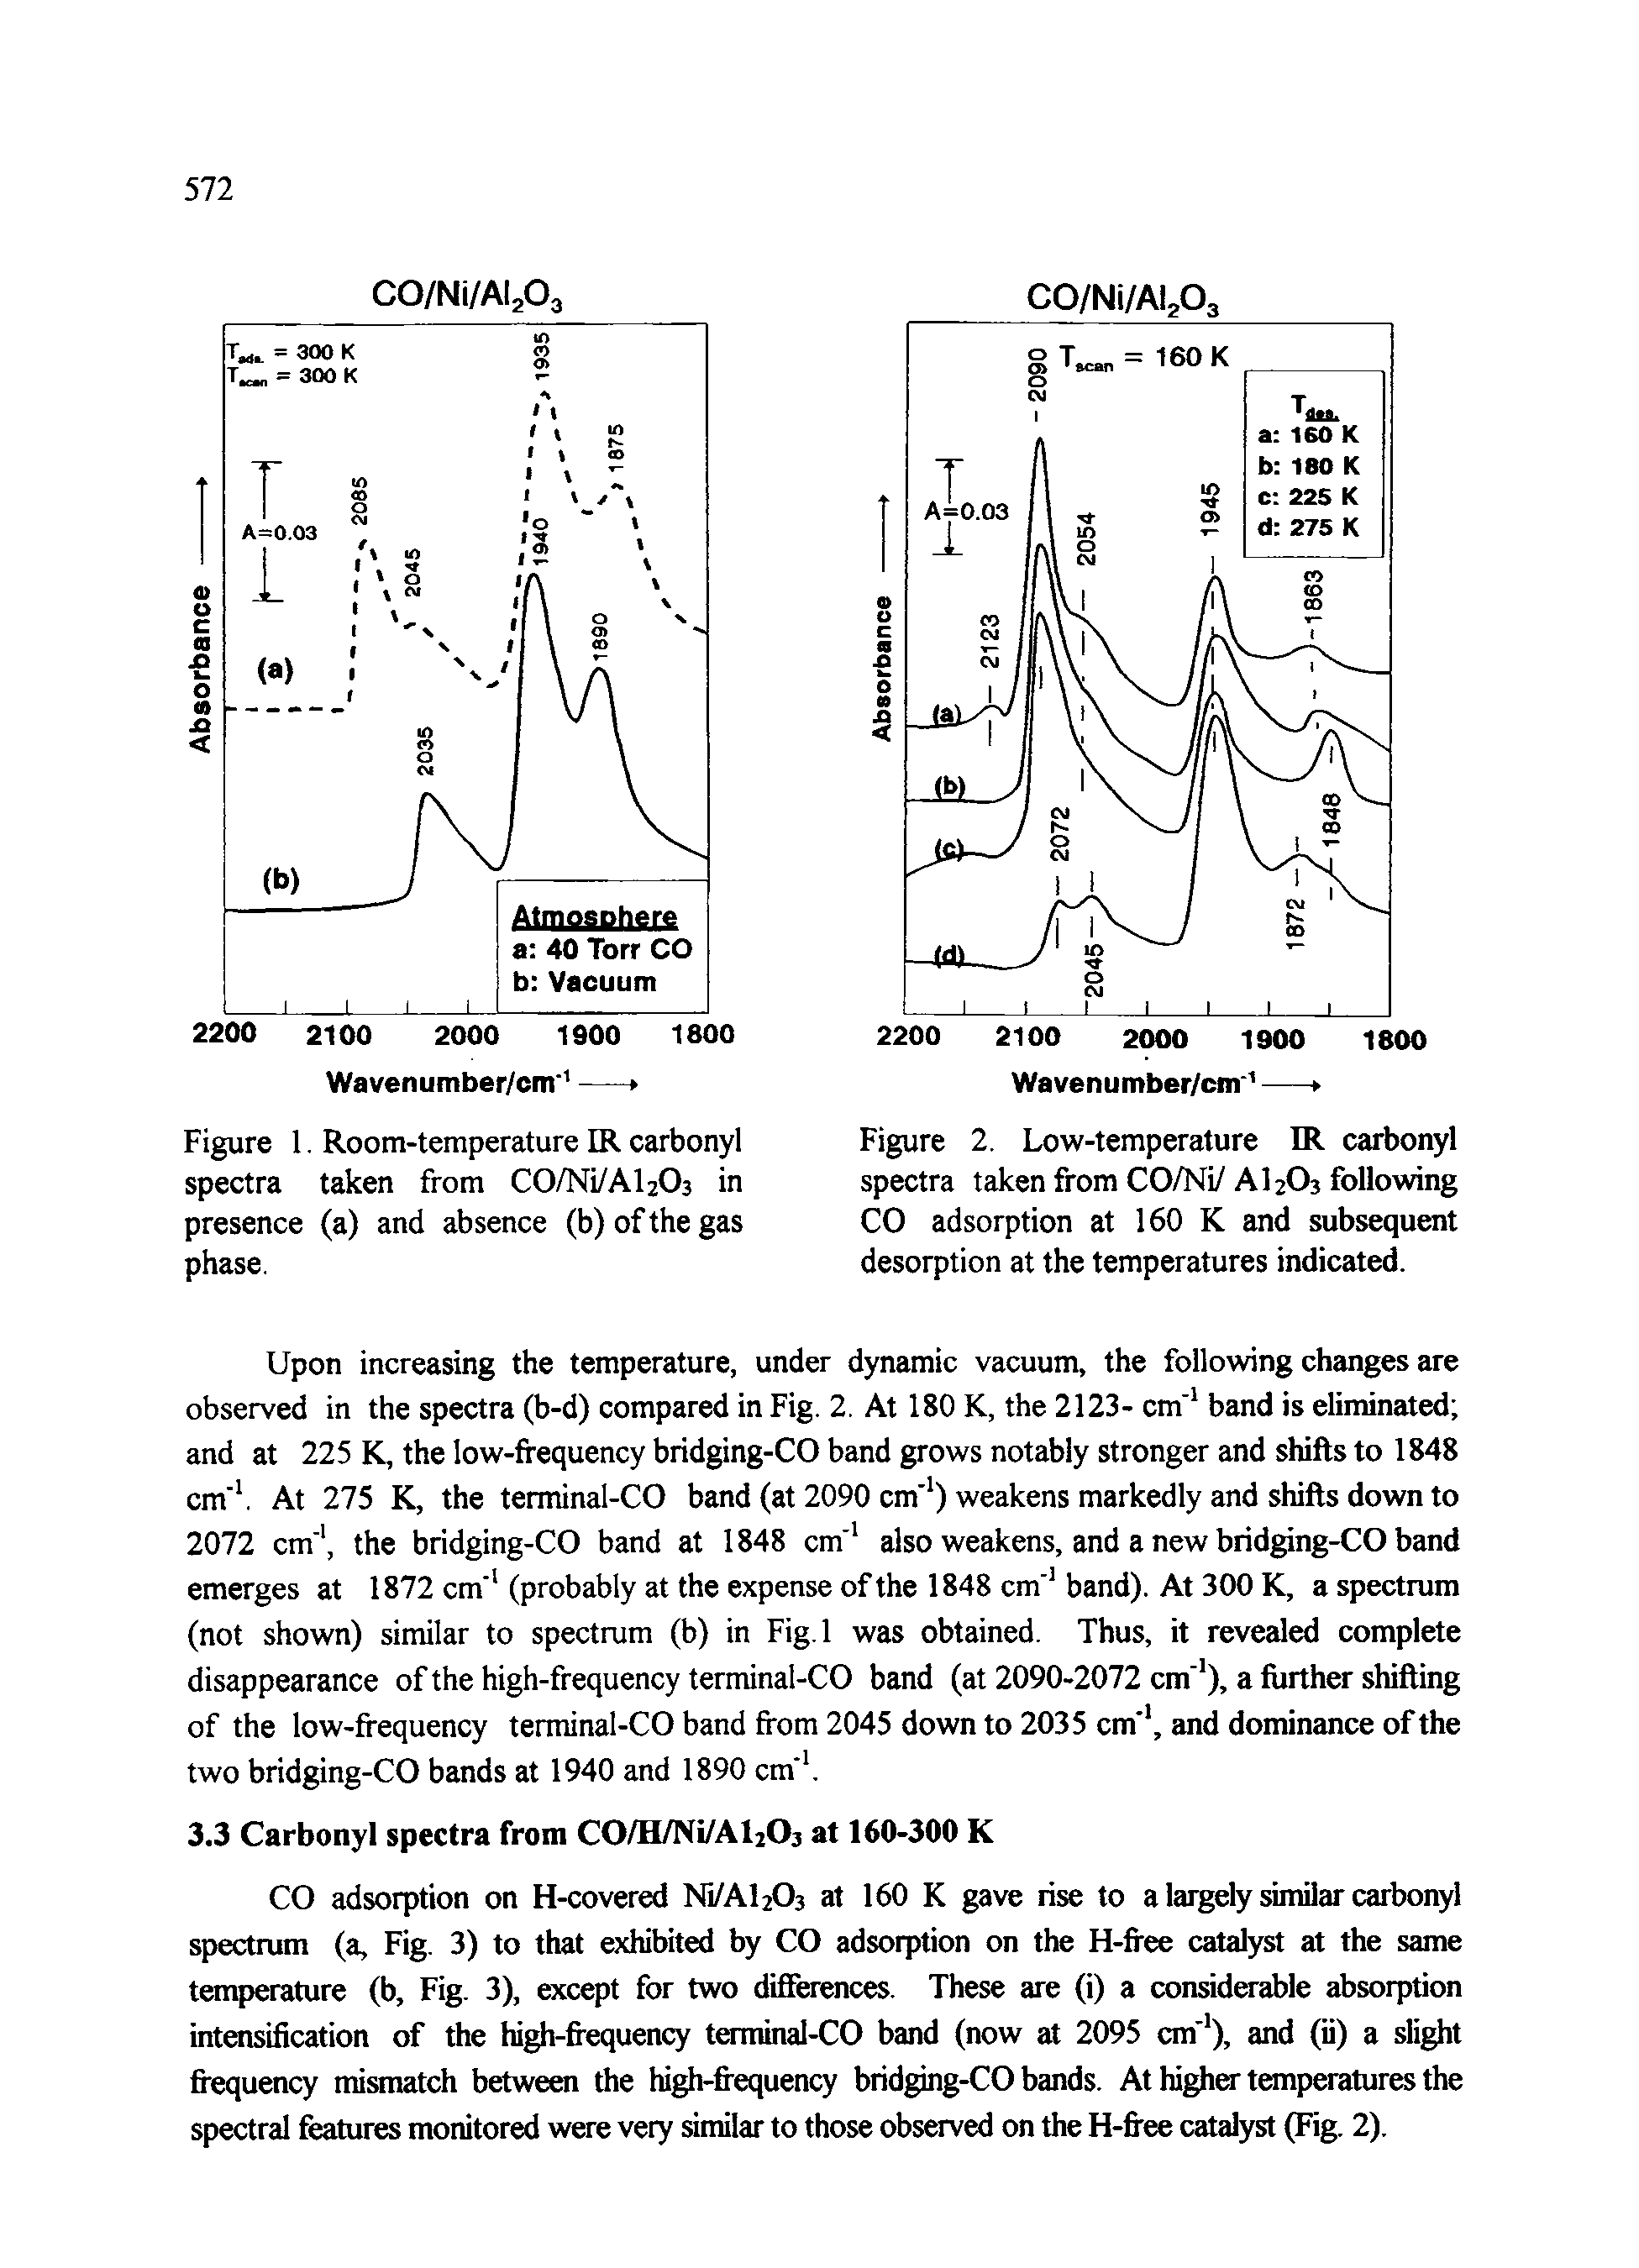 Figure 2. Low-temperature IR carbonyl spectra taken from CO/Ni/ AI2O3 following CO adsorption at 160 K and subsequent desorption at the temperatures indicated.